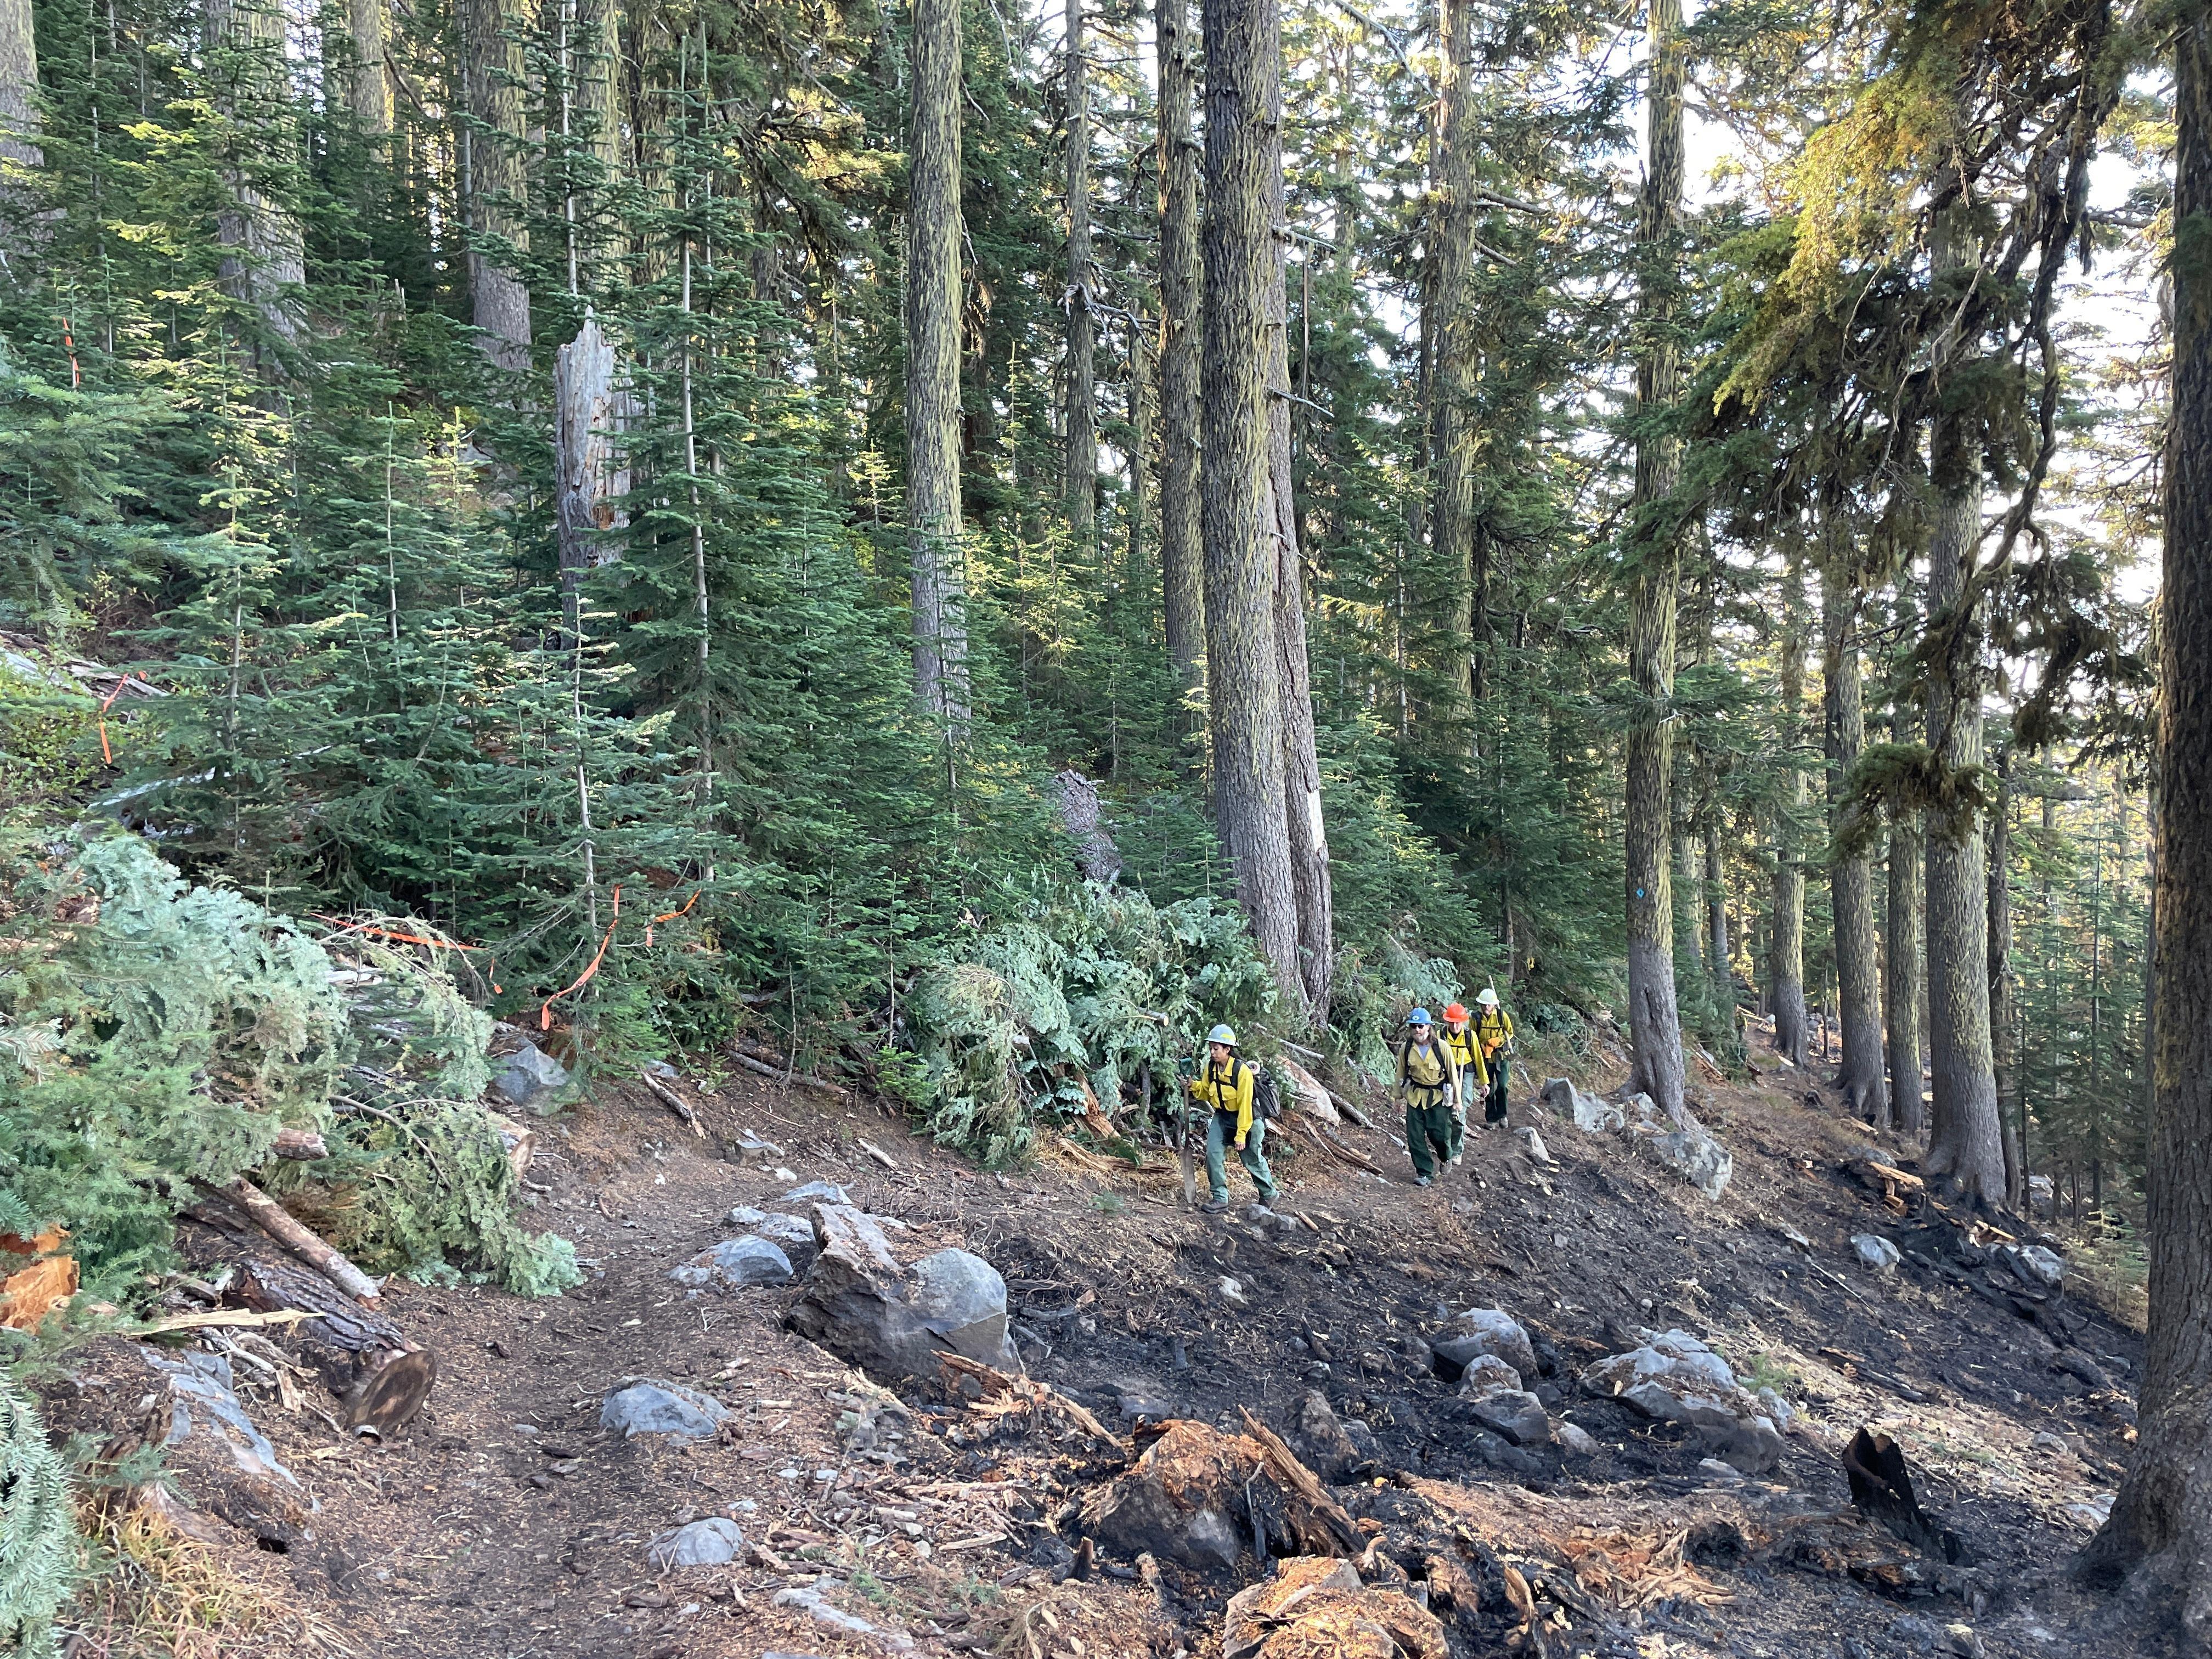 Cedar Creek BAER team members hike through areas along the edge of the Cedar Creek Fire to verify soil burn severity and identify emergency risks and imminent threats to critical values.